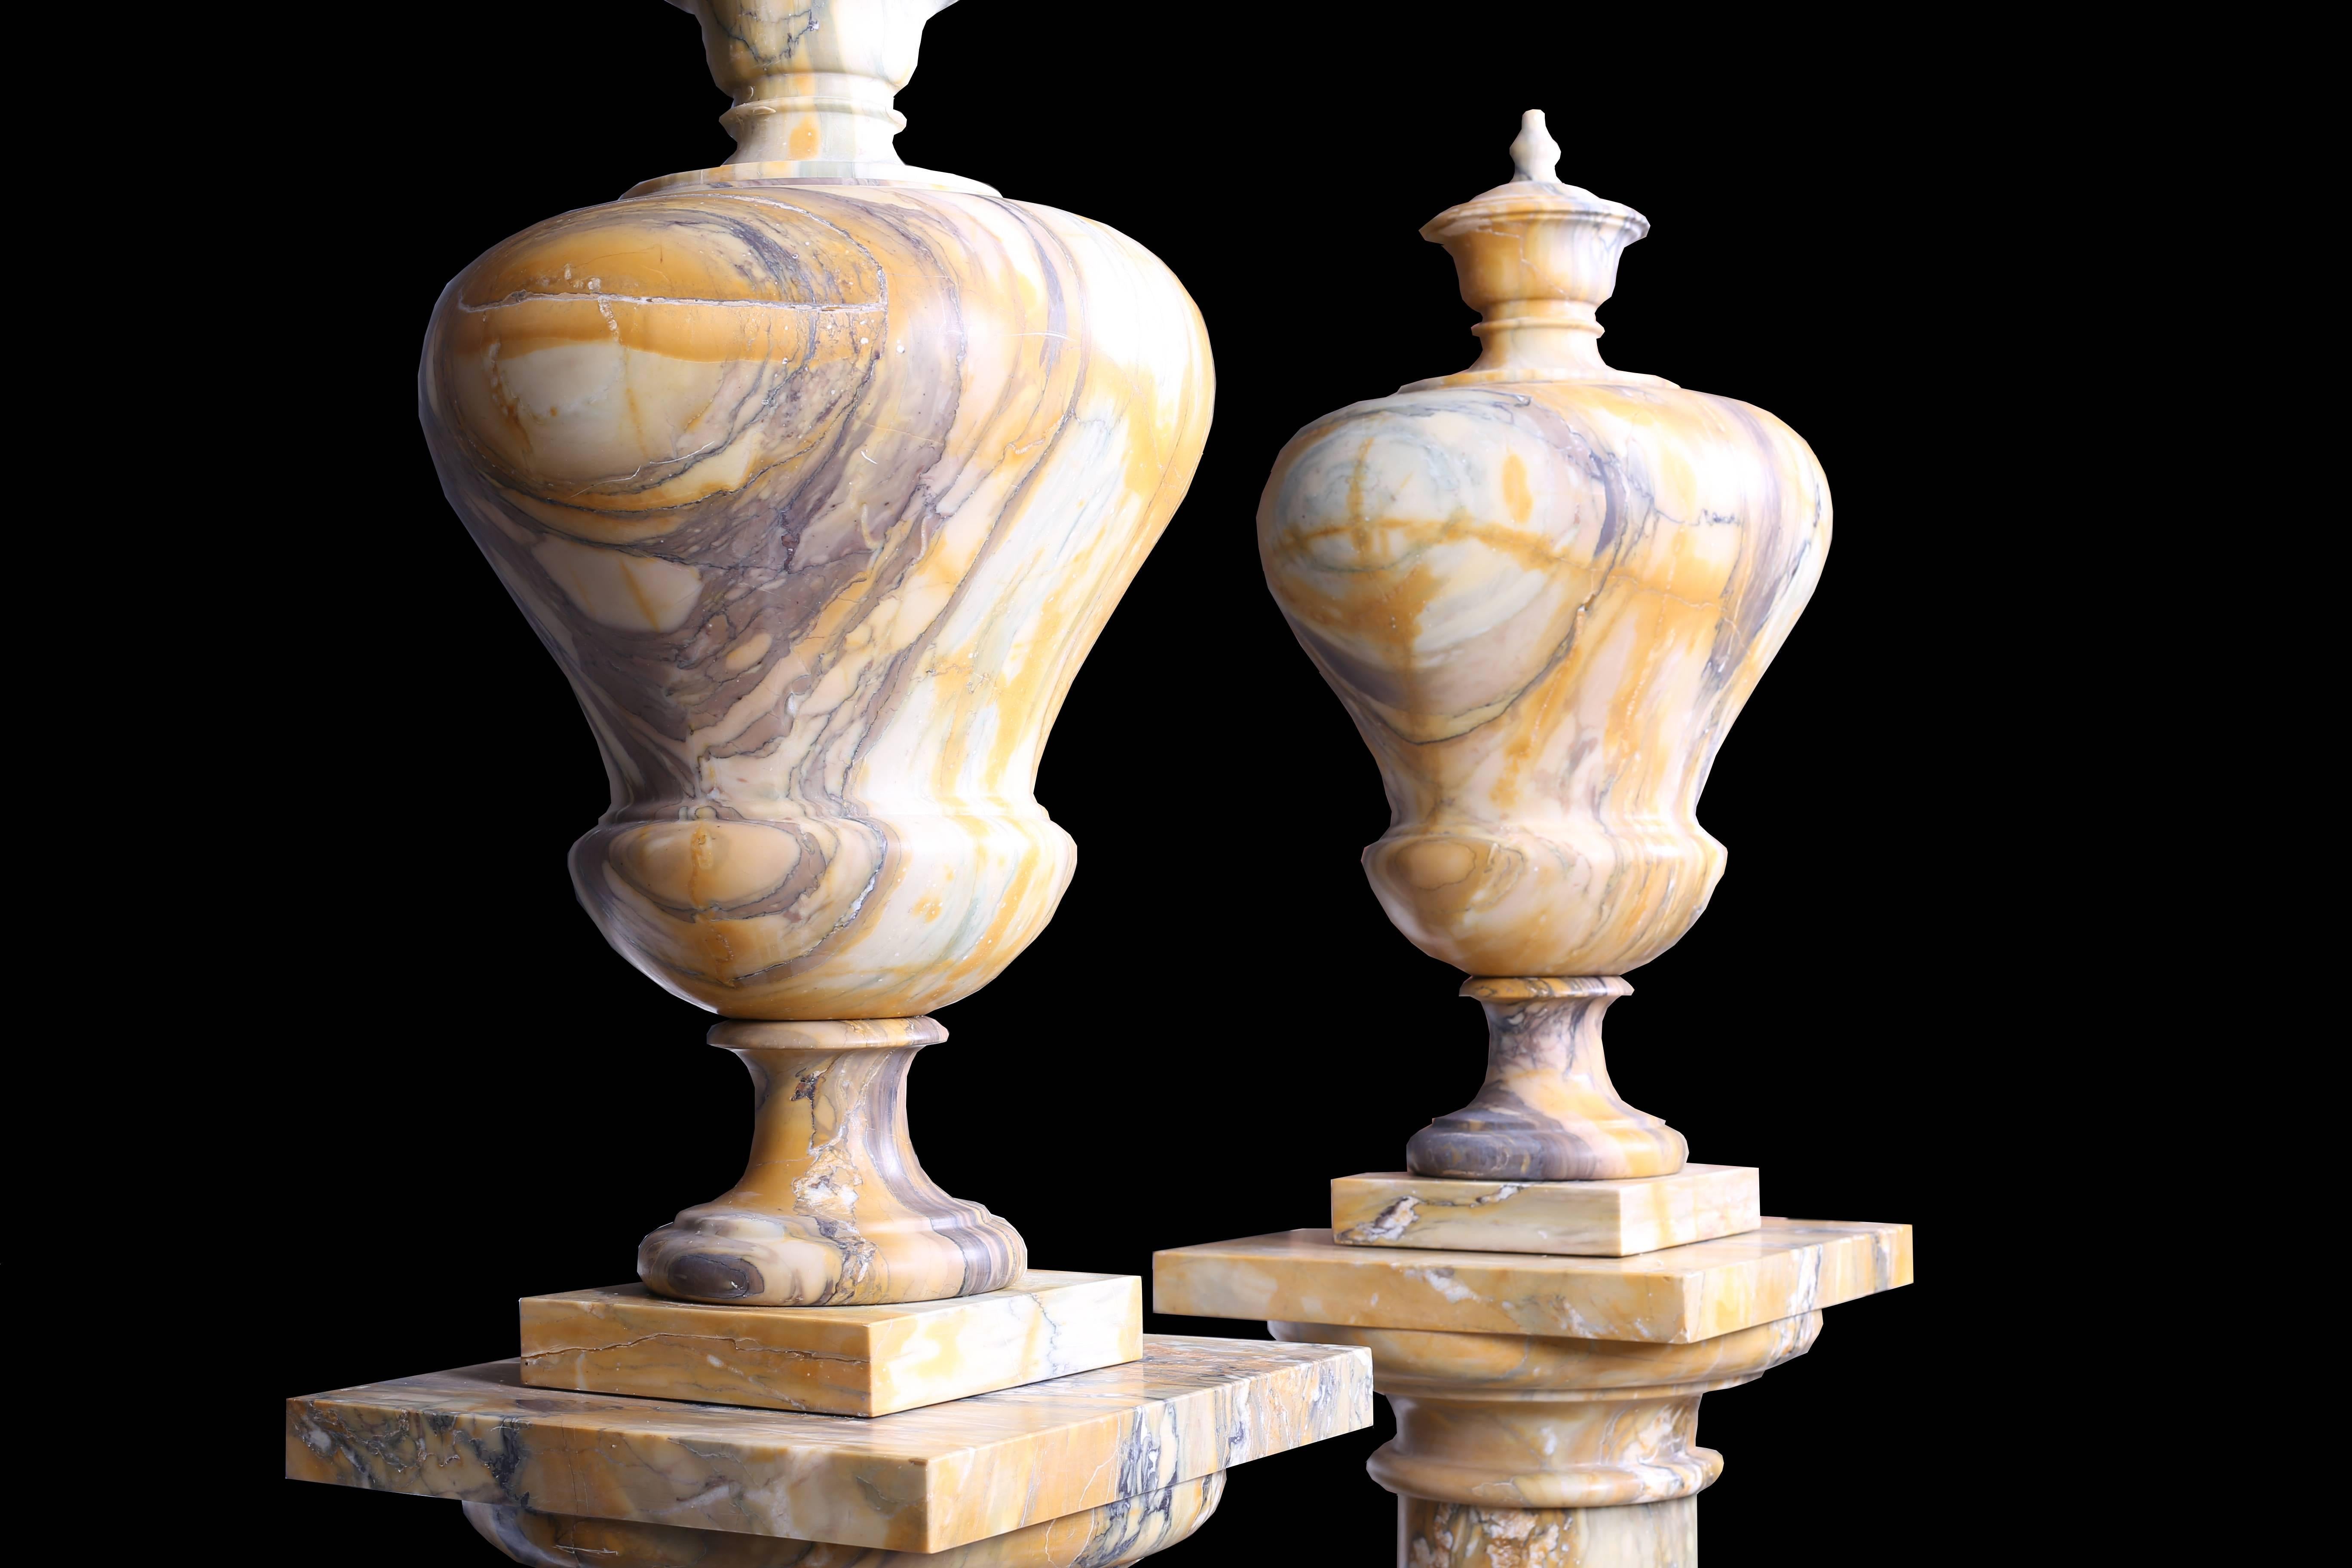 A pair of rather grand vintage and extremely tall early 20th century in high quality Sienna marble urns in the neoclassical style, raised on high quality Sienna marble column plinths with Sienna marble bases, Italian, circa